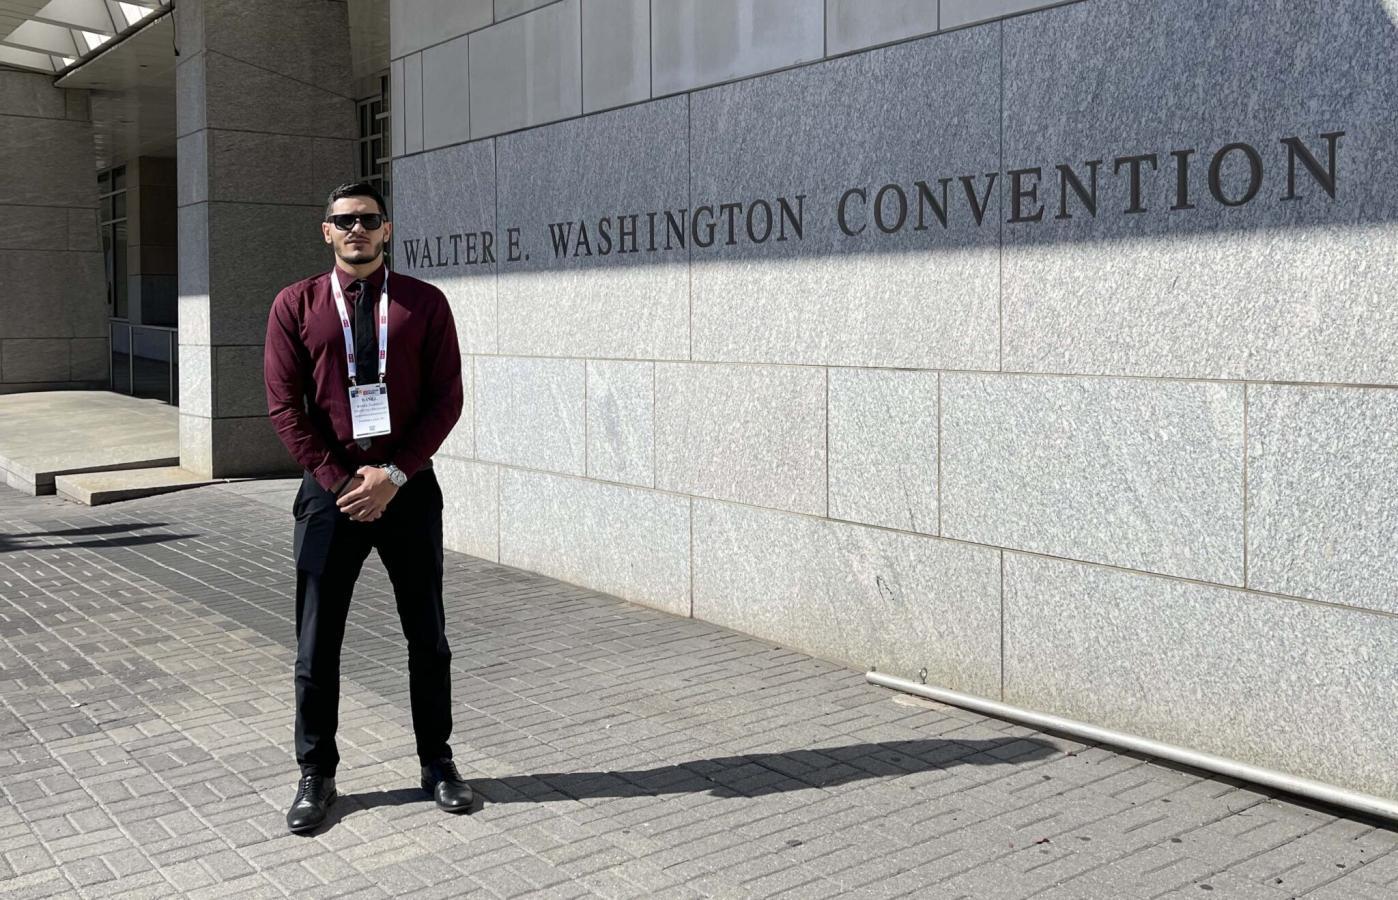 Basel Farhat standing infront of the Walter E. Washington Convention Center, wearing dress clothes and black sunglasses.